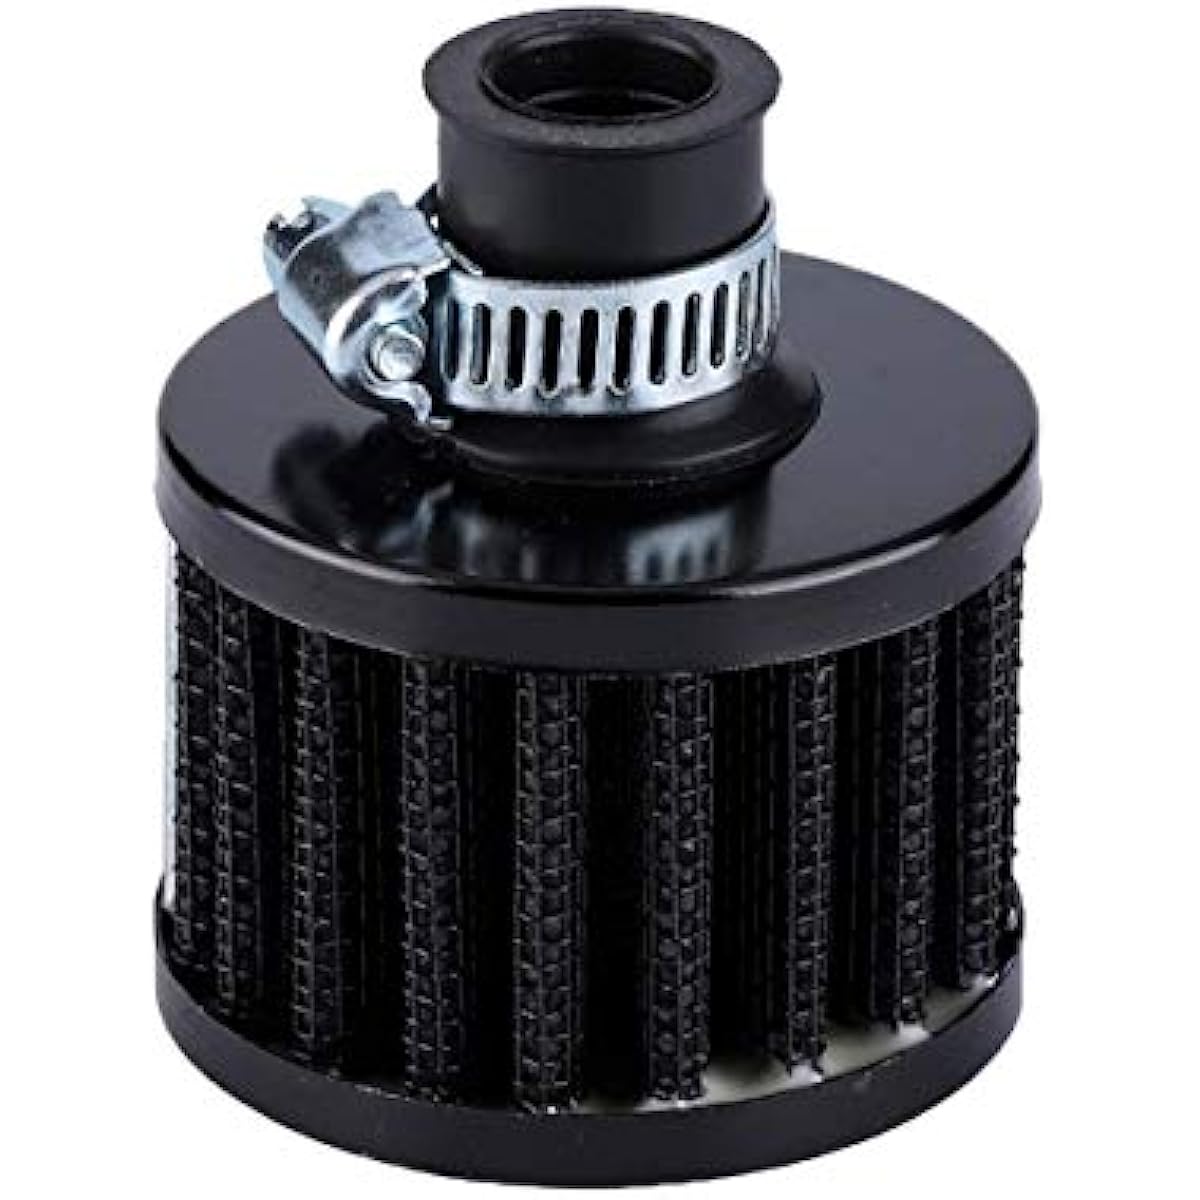 2pcs 12mm/ 0.47 Oil Valve Cover Breather Filter - Increase Air Intake &  Improve Performance for Car & Motorcycle